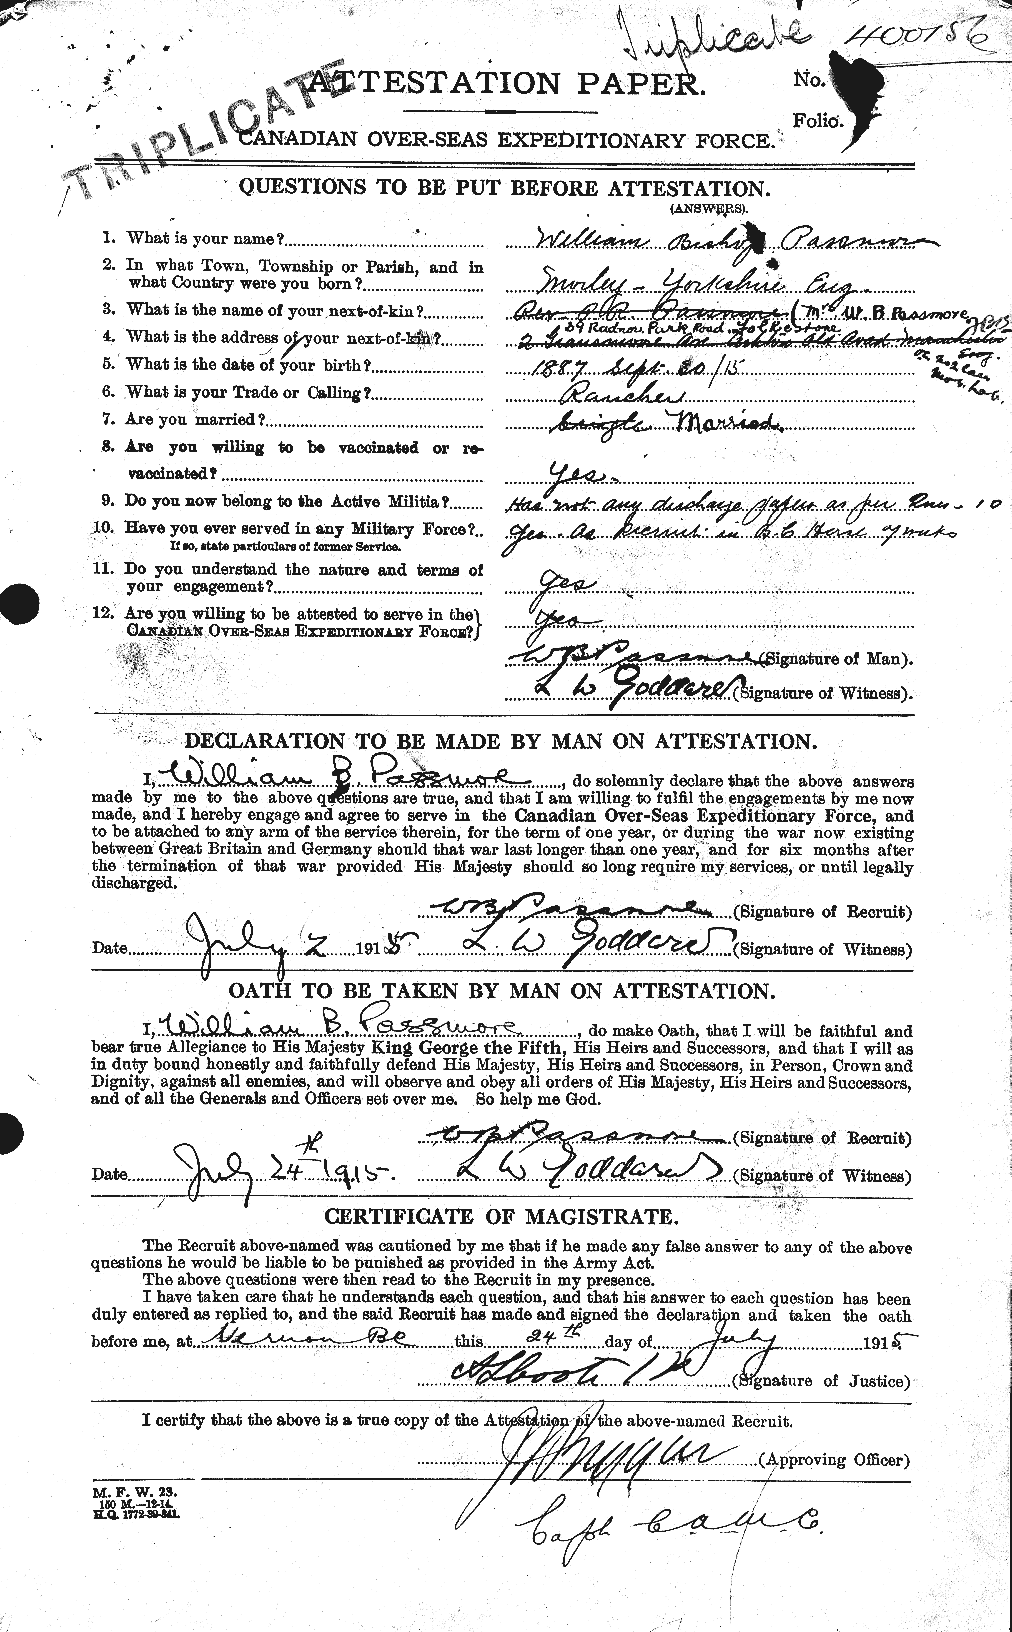 Personnel Records of the First World War - CEF 567358a